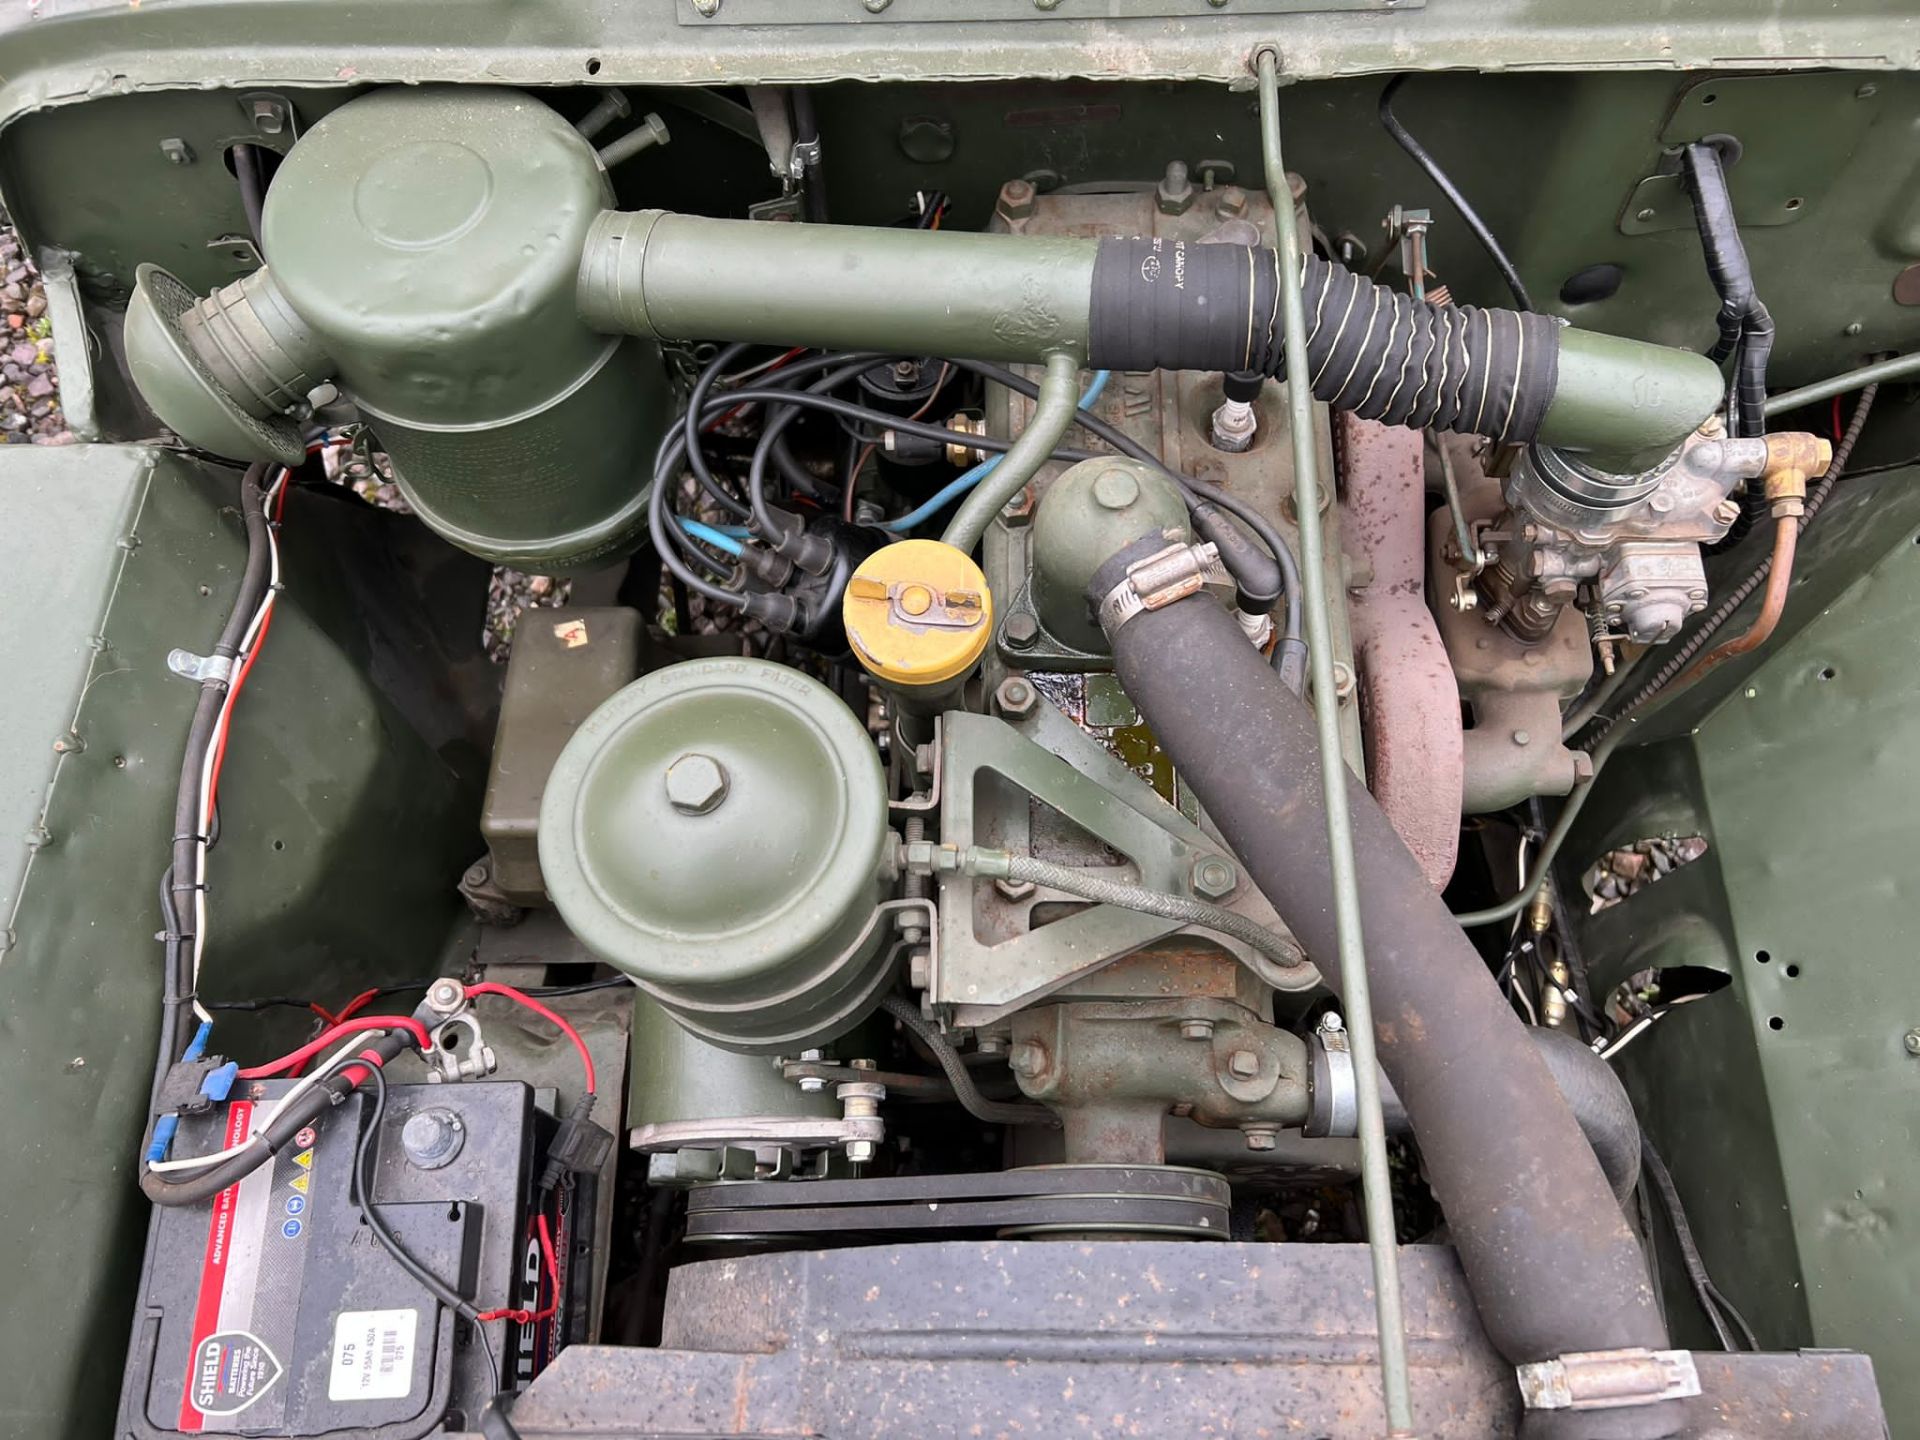 1945 Willys Jeep - Military Vehicle - Restored and raring to go... - Image 13 of 13